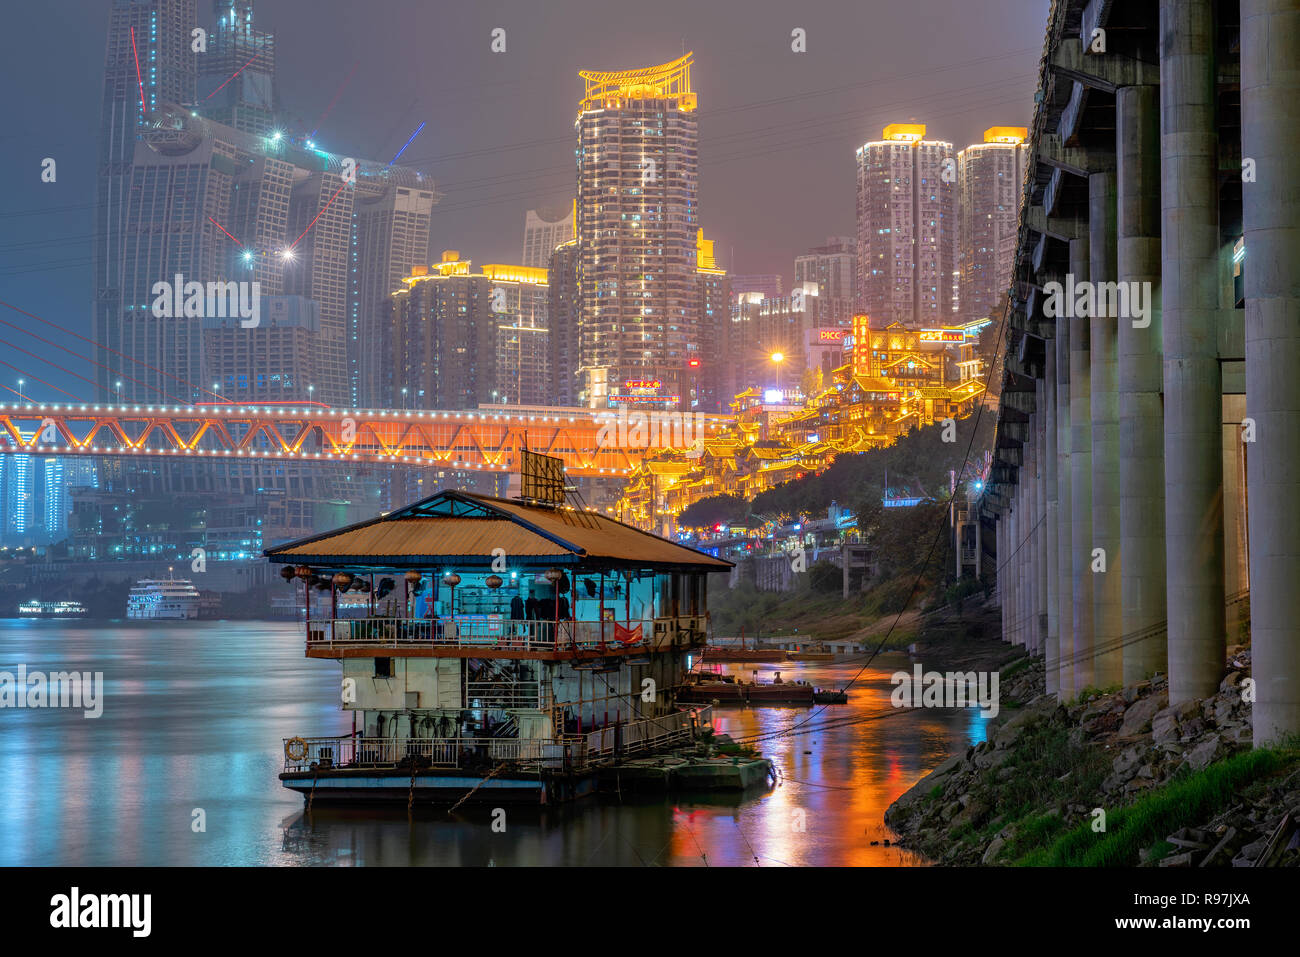 Night view of a boat on the Yangtze River with high rise city buildings in the distance in Chongqing, China Stock Photo